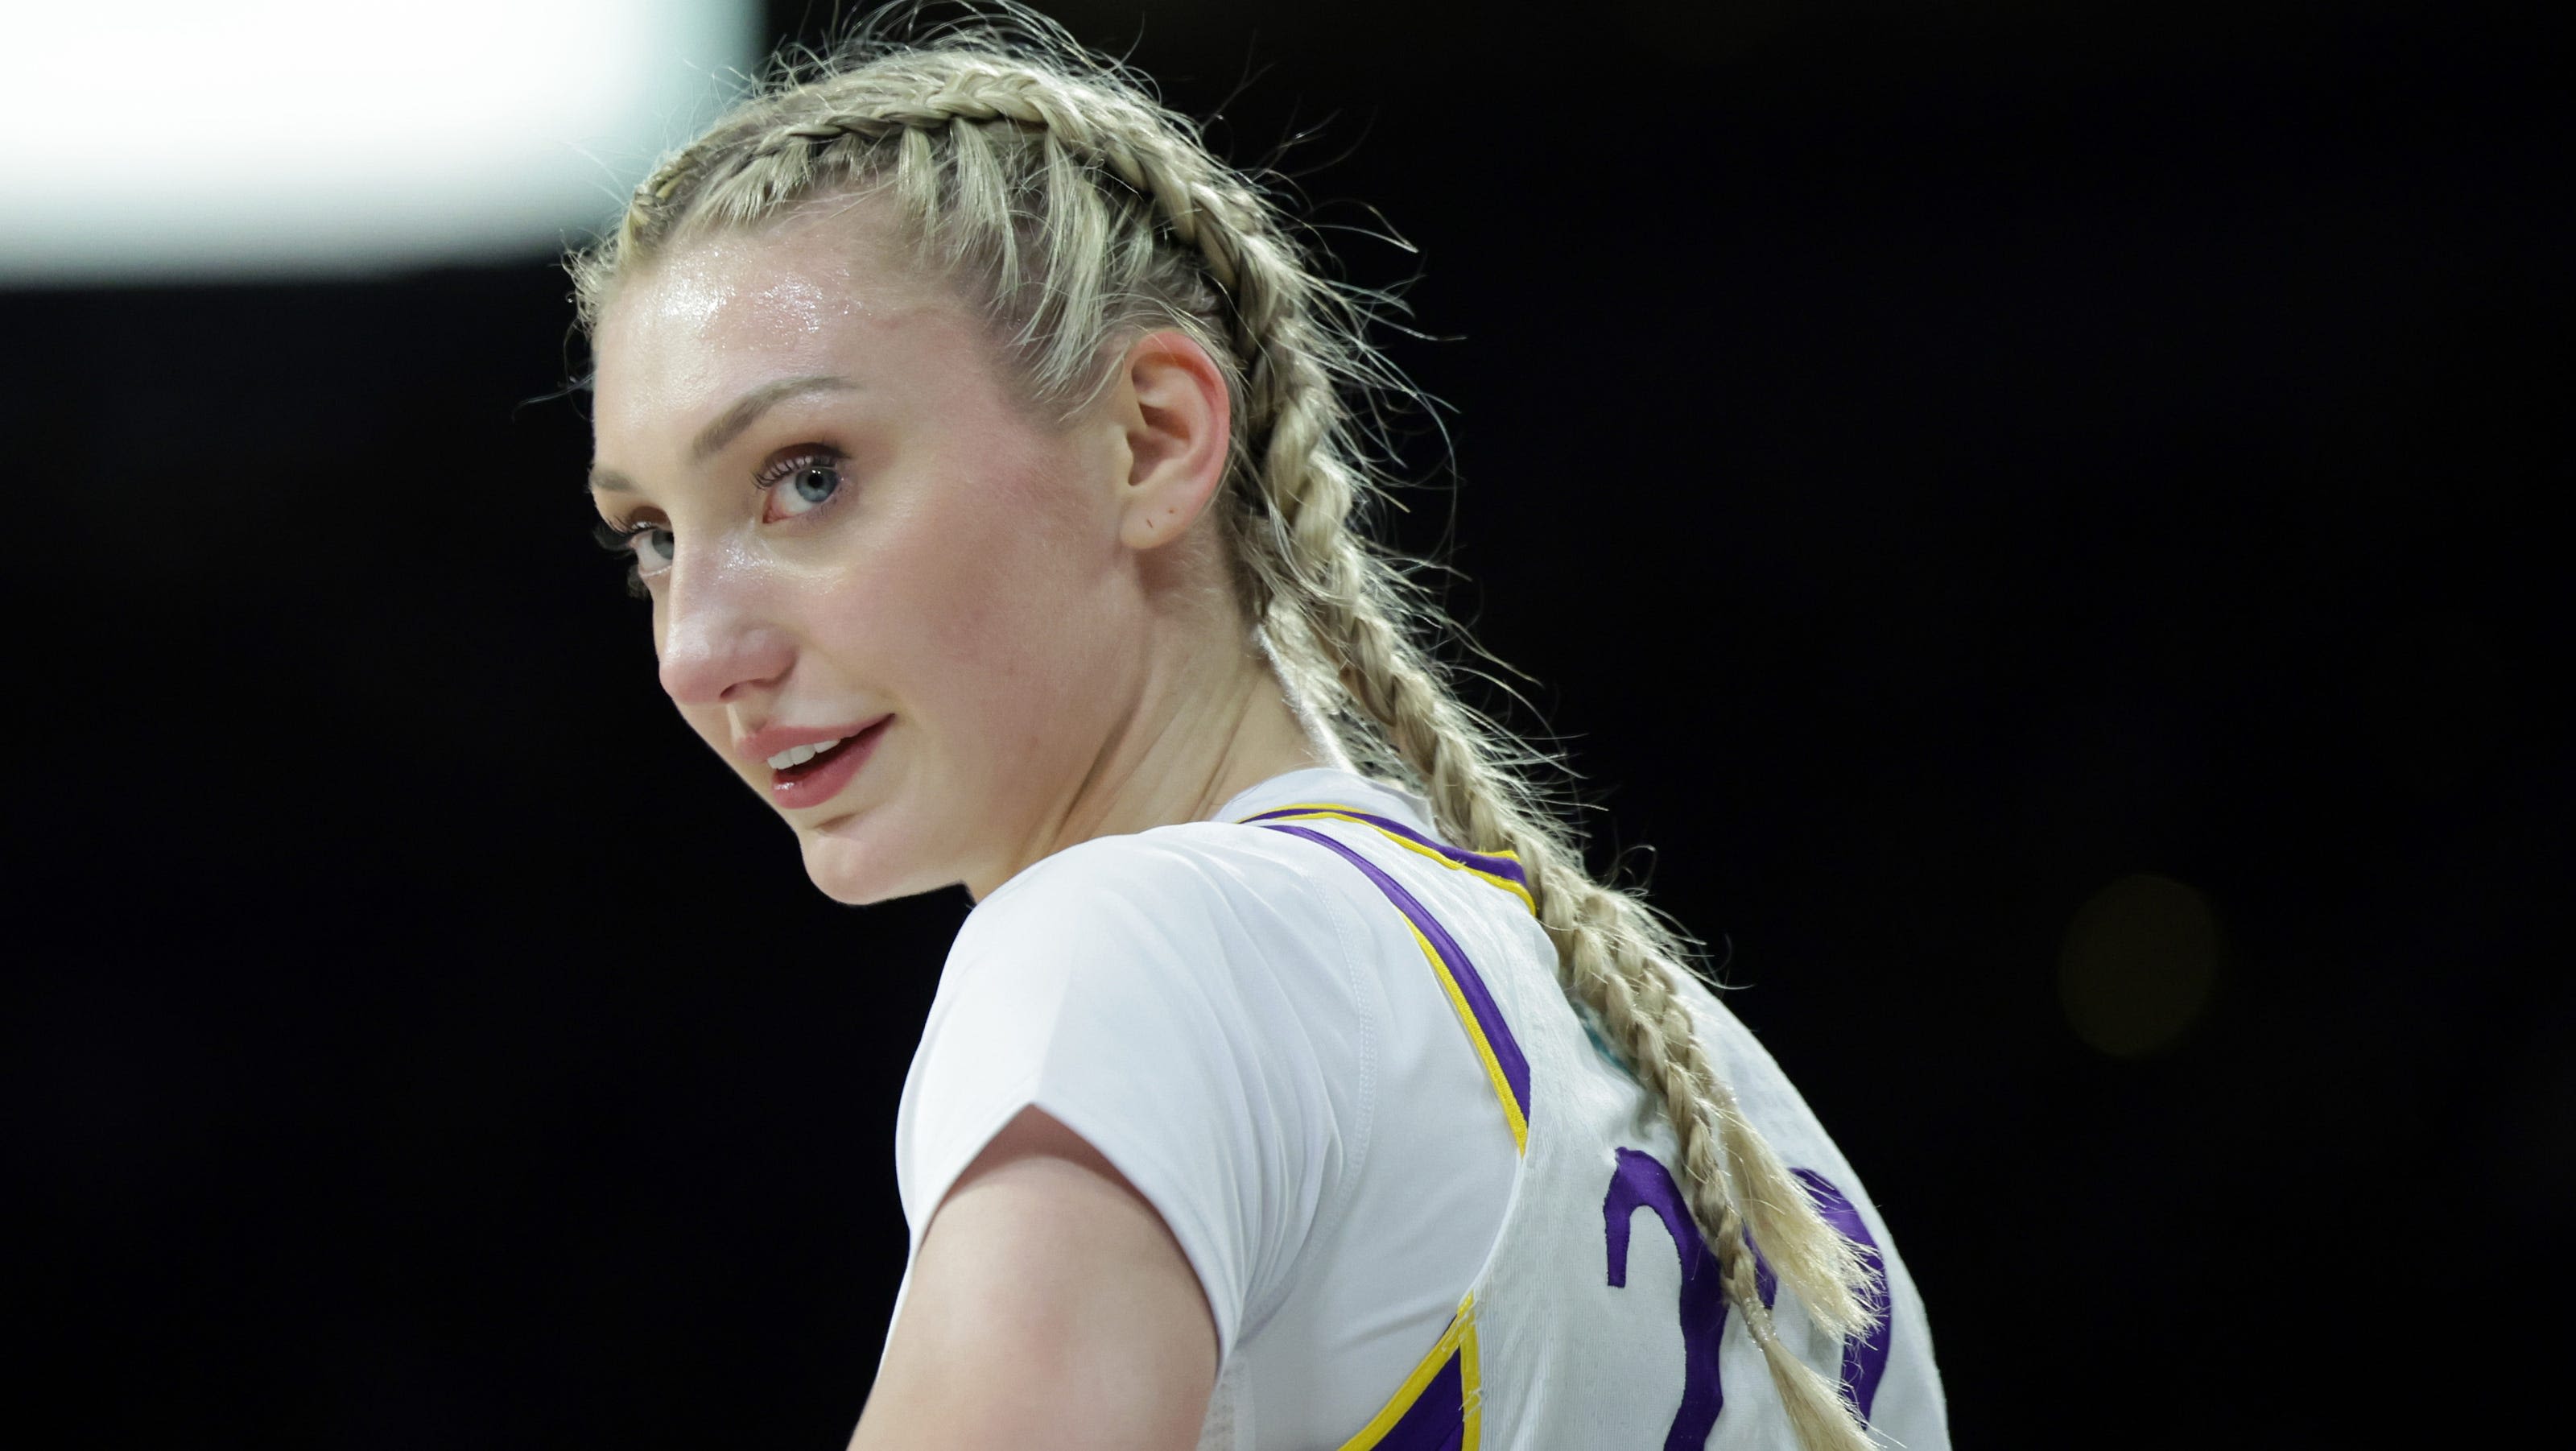 Los Angeles Sparks rookie Cameron Brink carried off court with knee injury vs. Sun